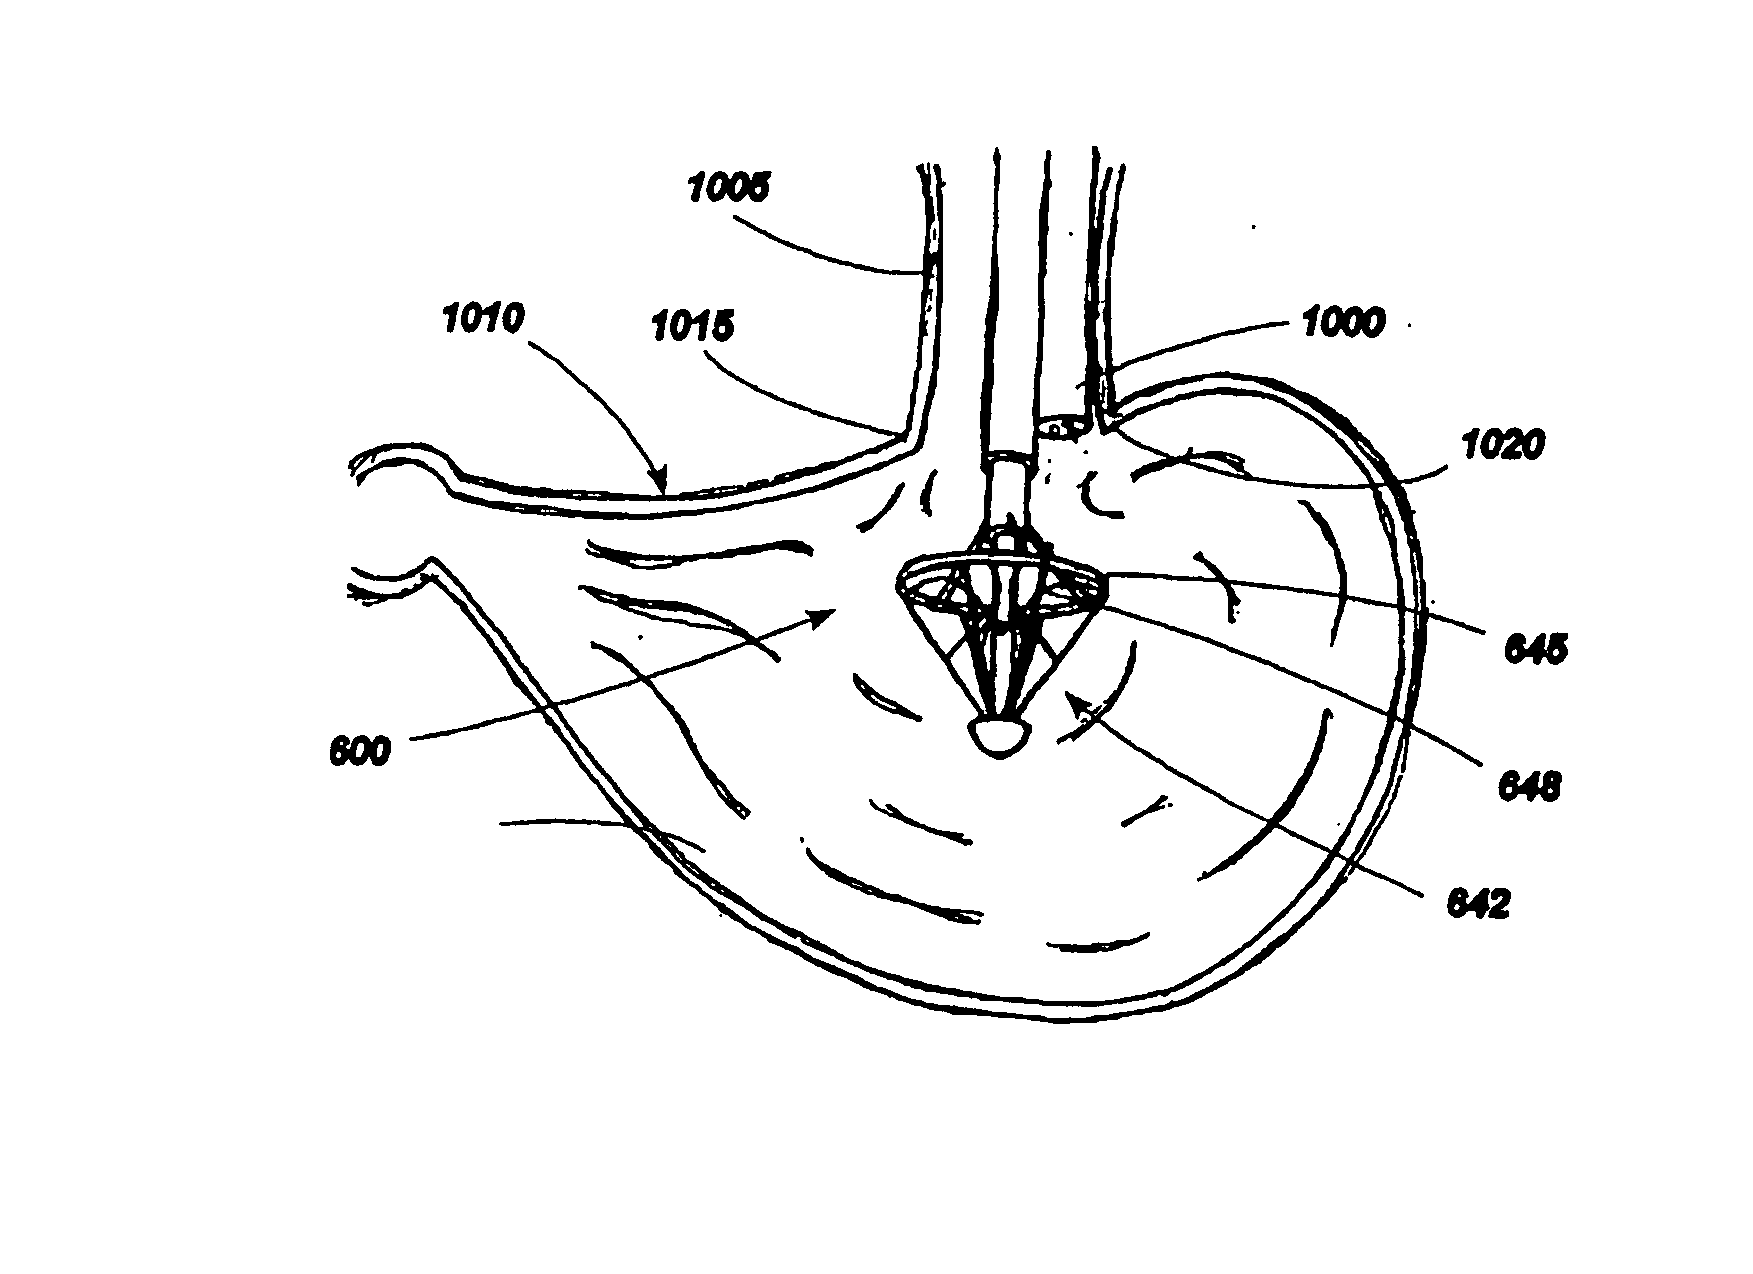 Implantable devices for controlling the size and shape of an anatomical structure or lumen